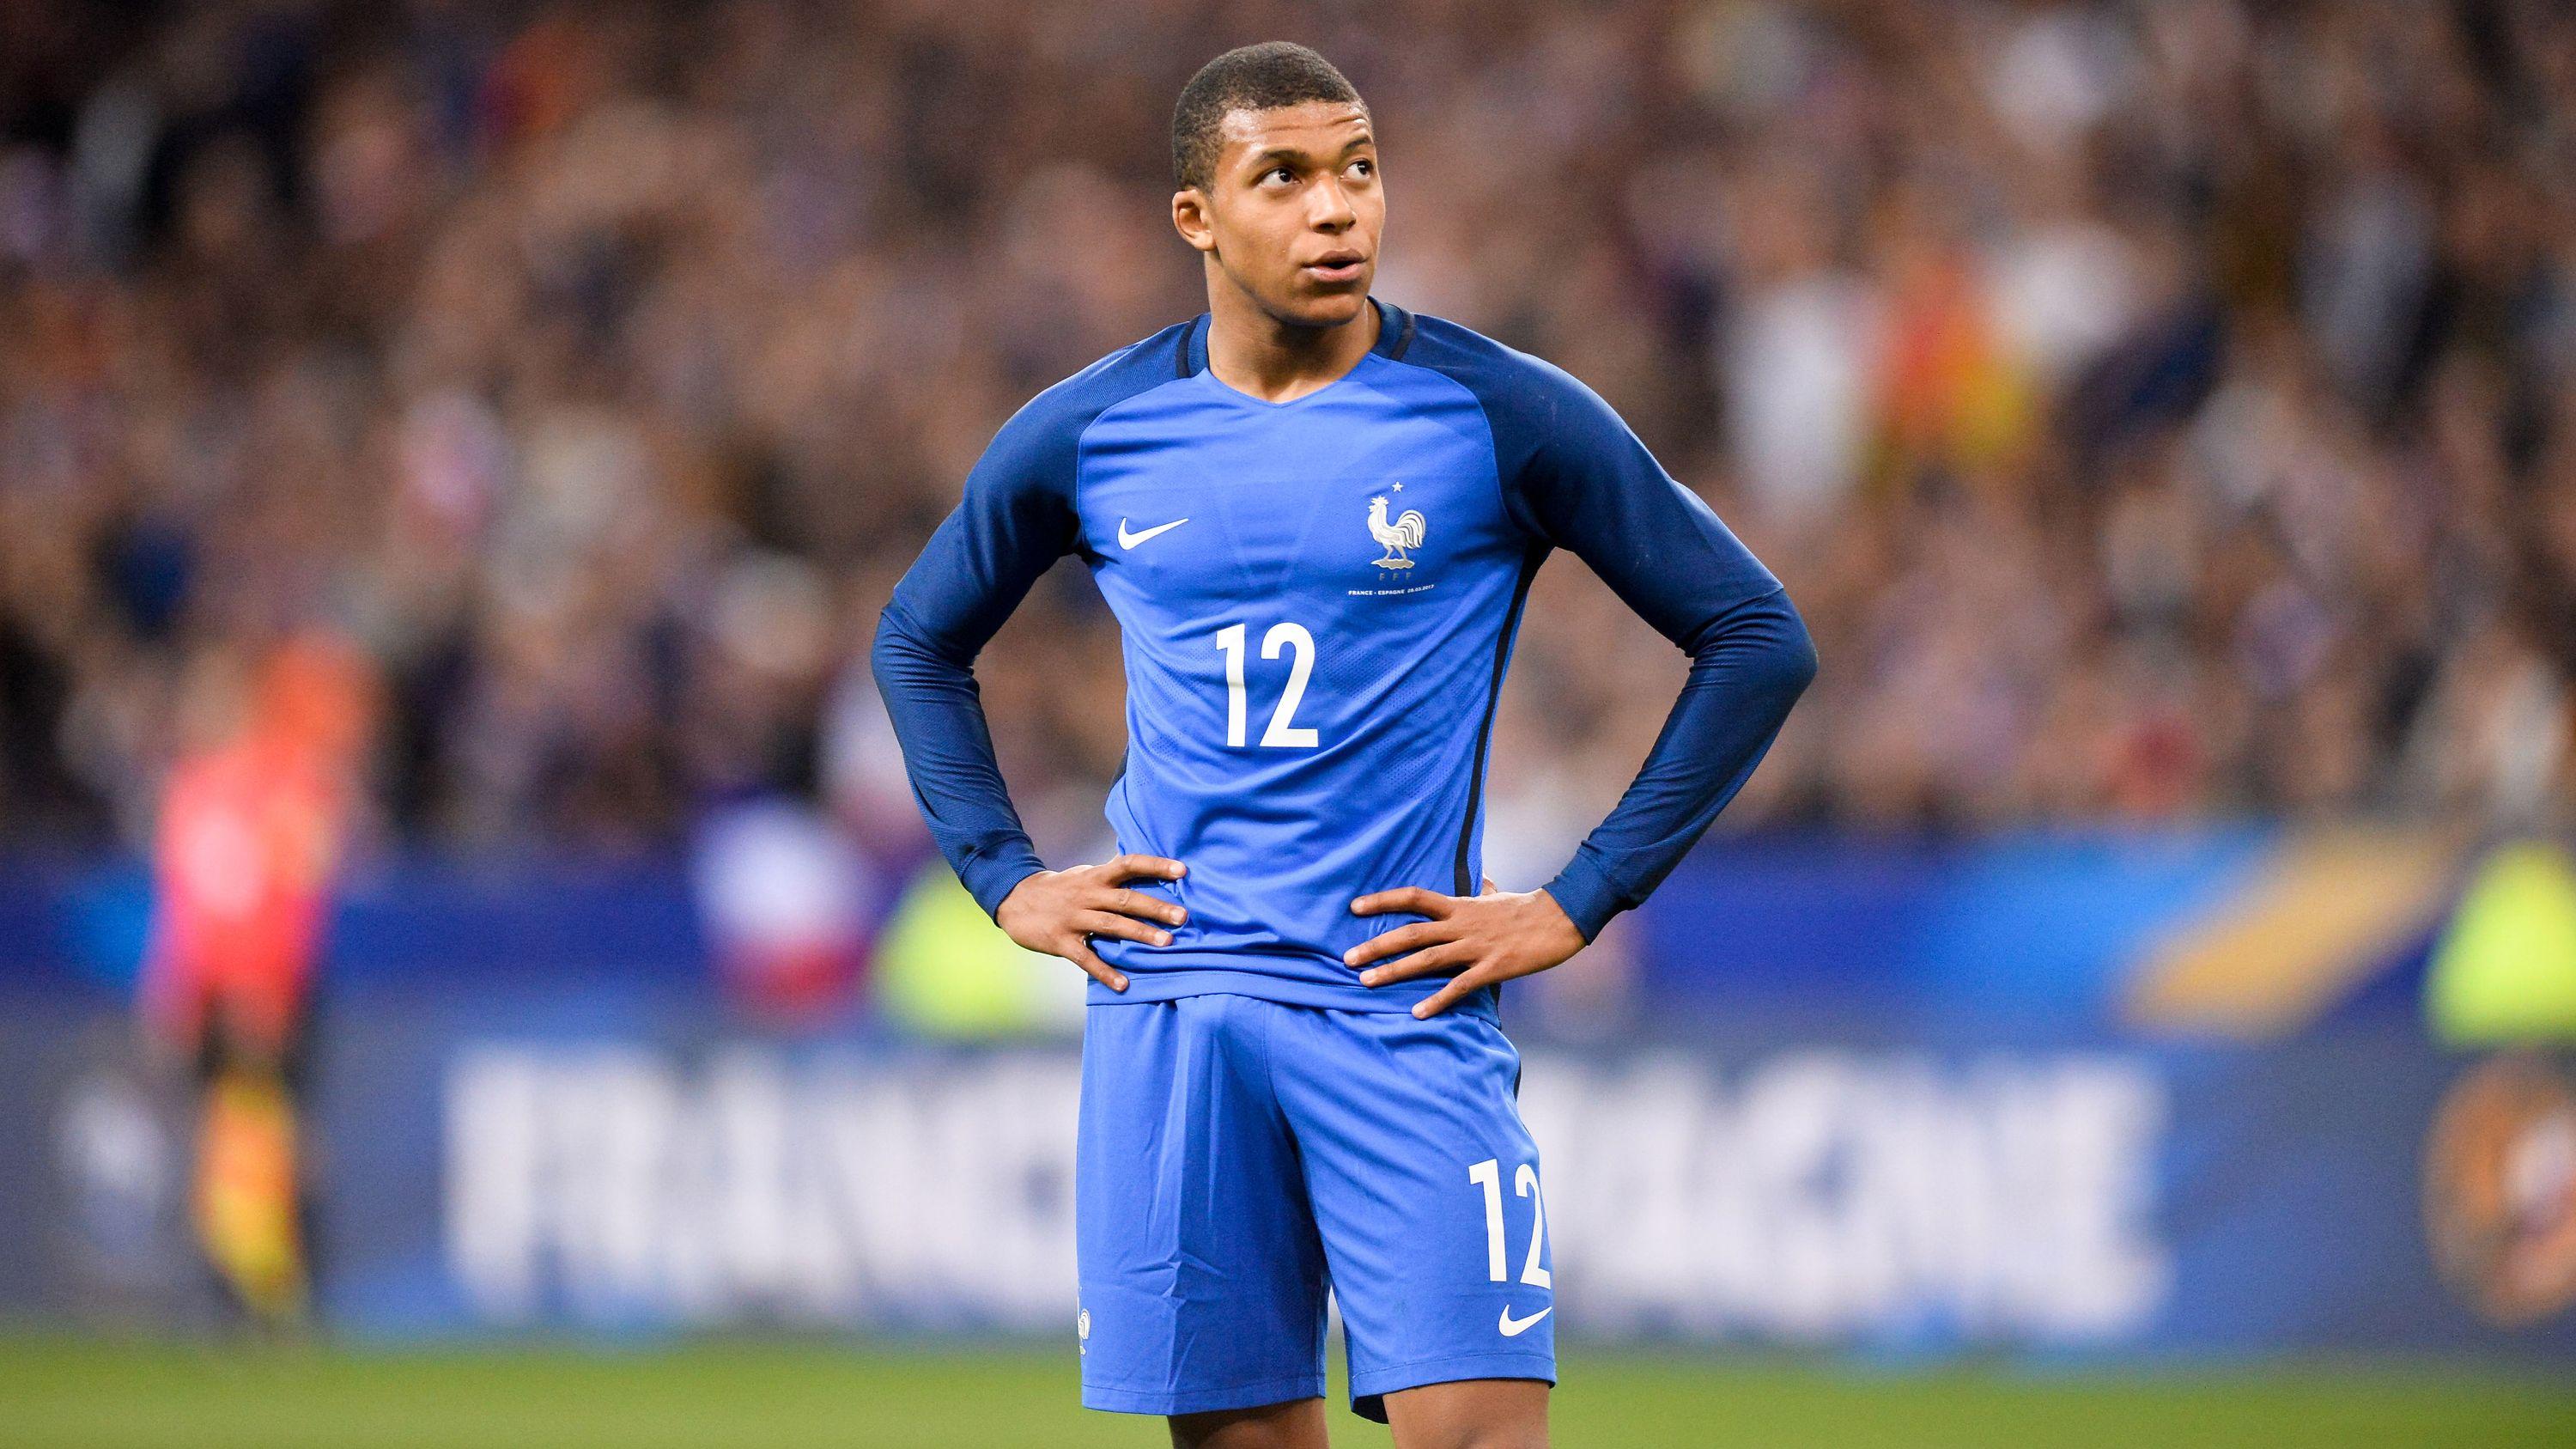 Kylian Mbappé Full HD Wallpaper and Background Imagex1687